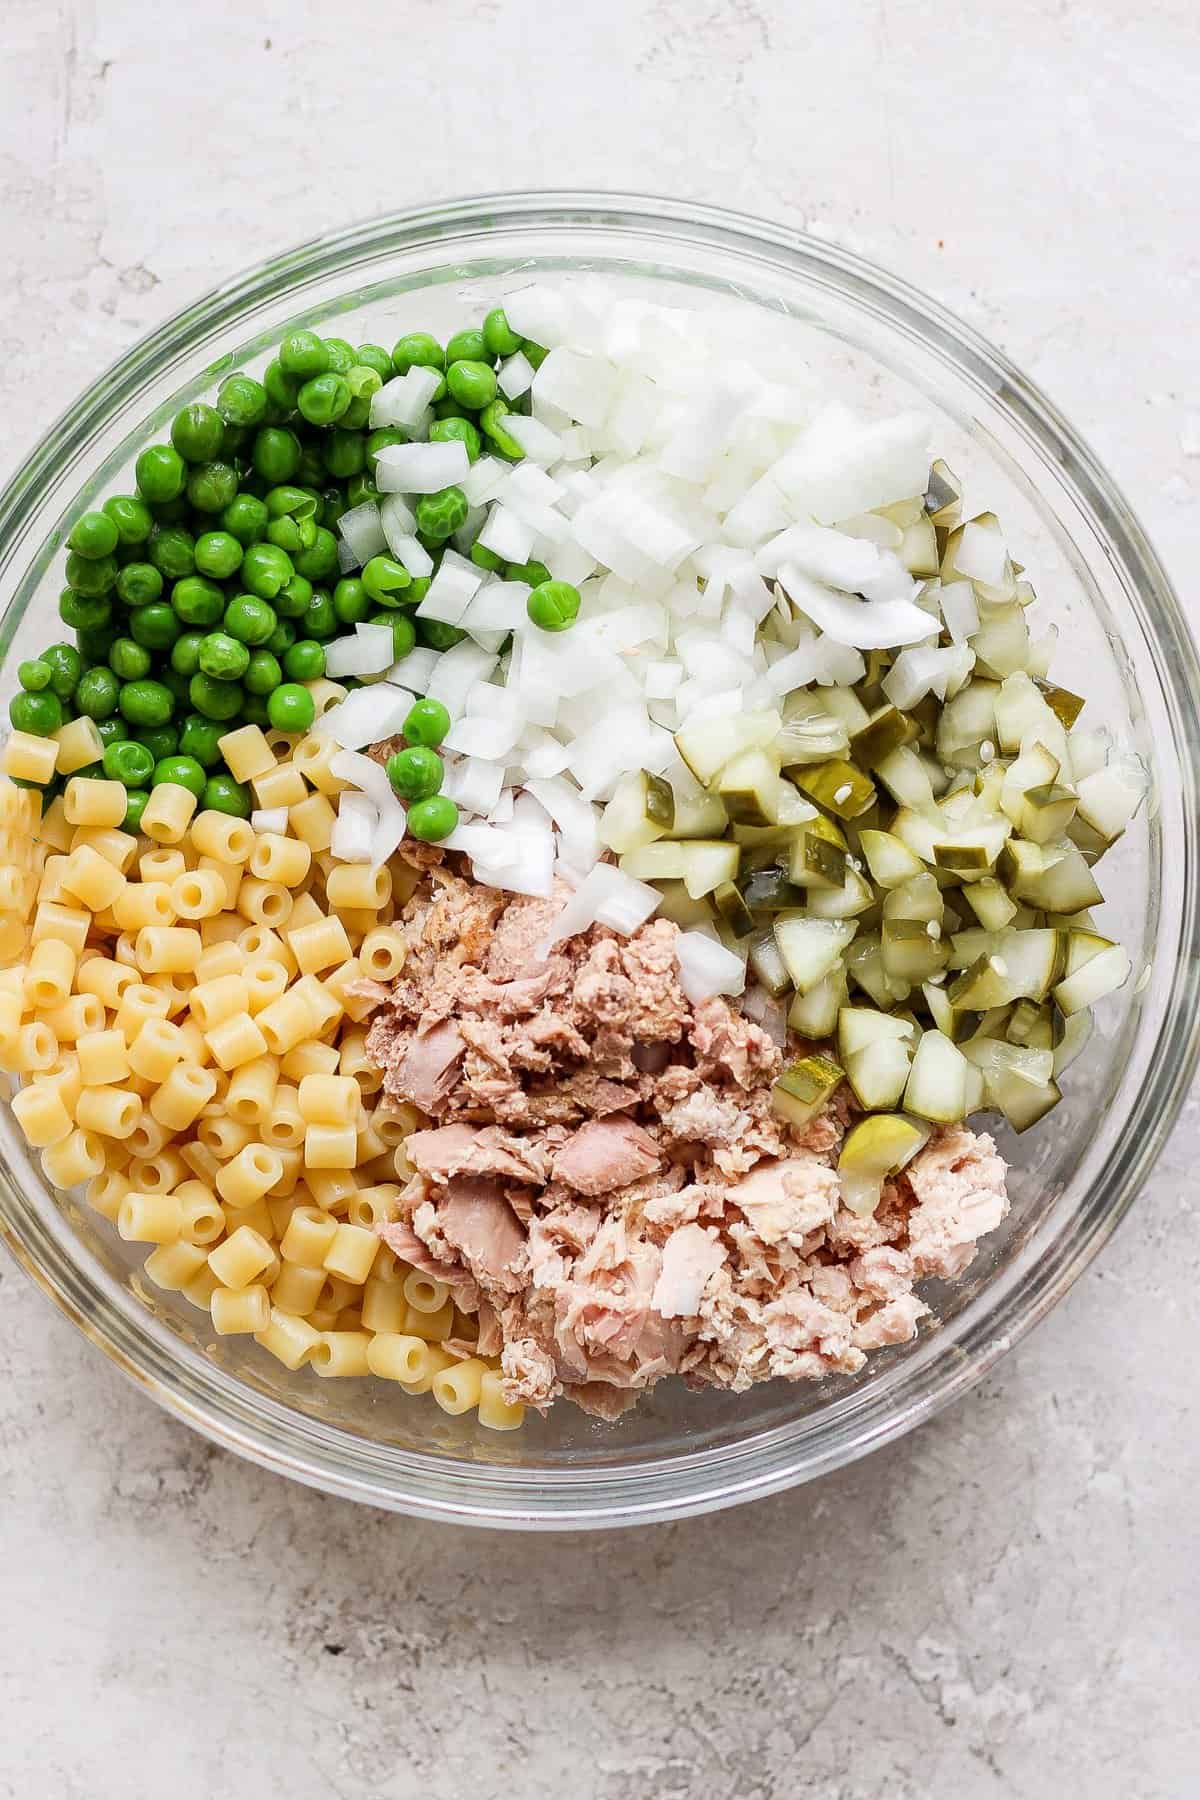 A bowl containing separate sections of diced onions, green peas, c،pped pickles, macaroni pasta, and canned tuna, arranged on a light, textured surface.